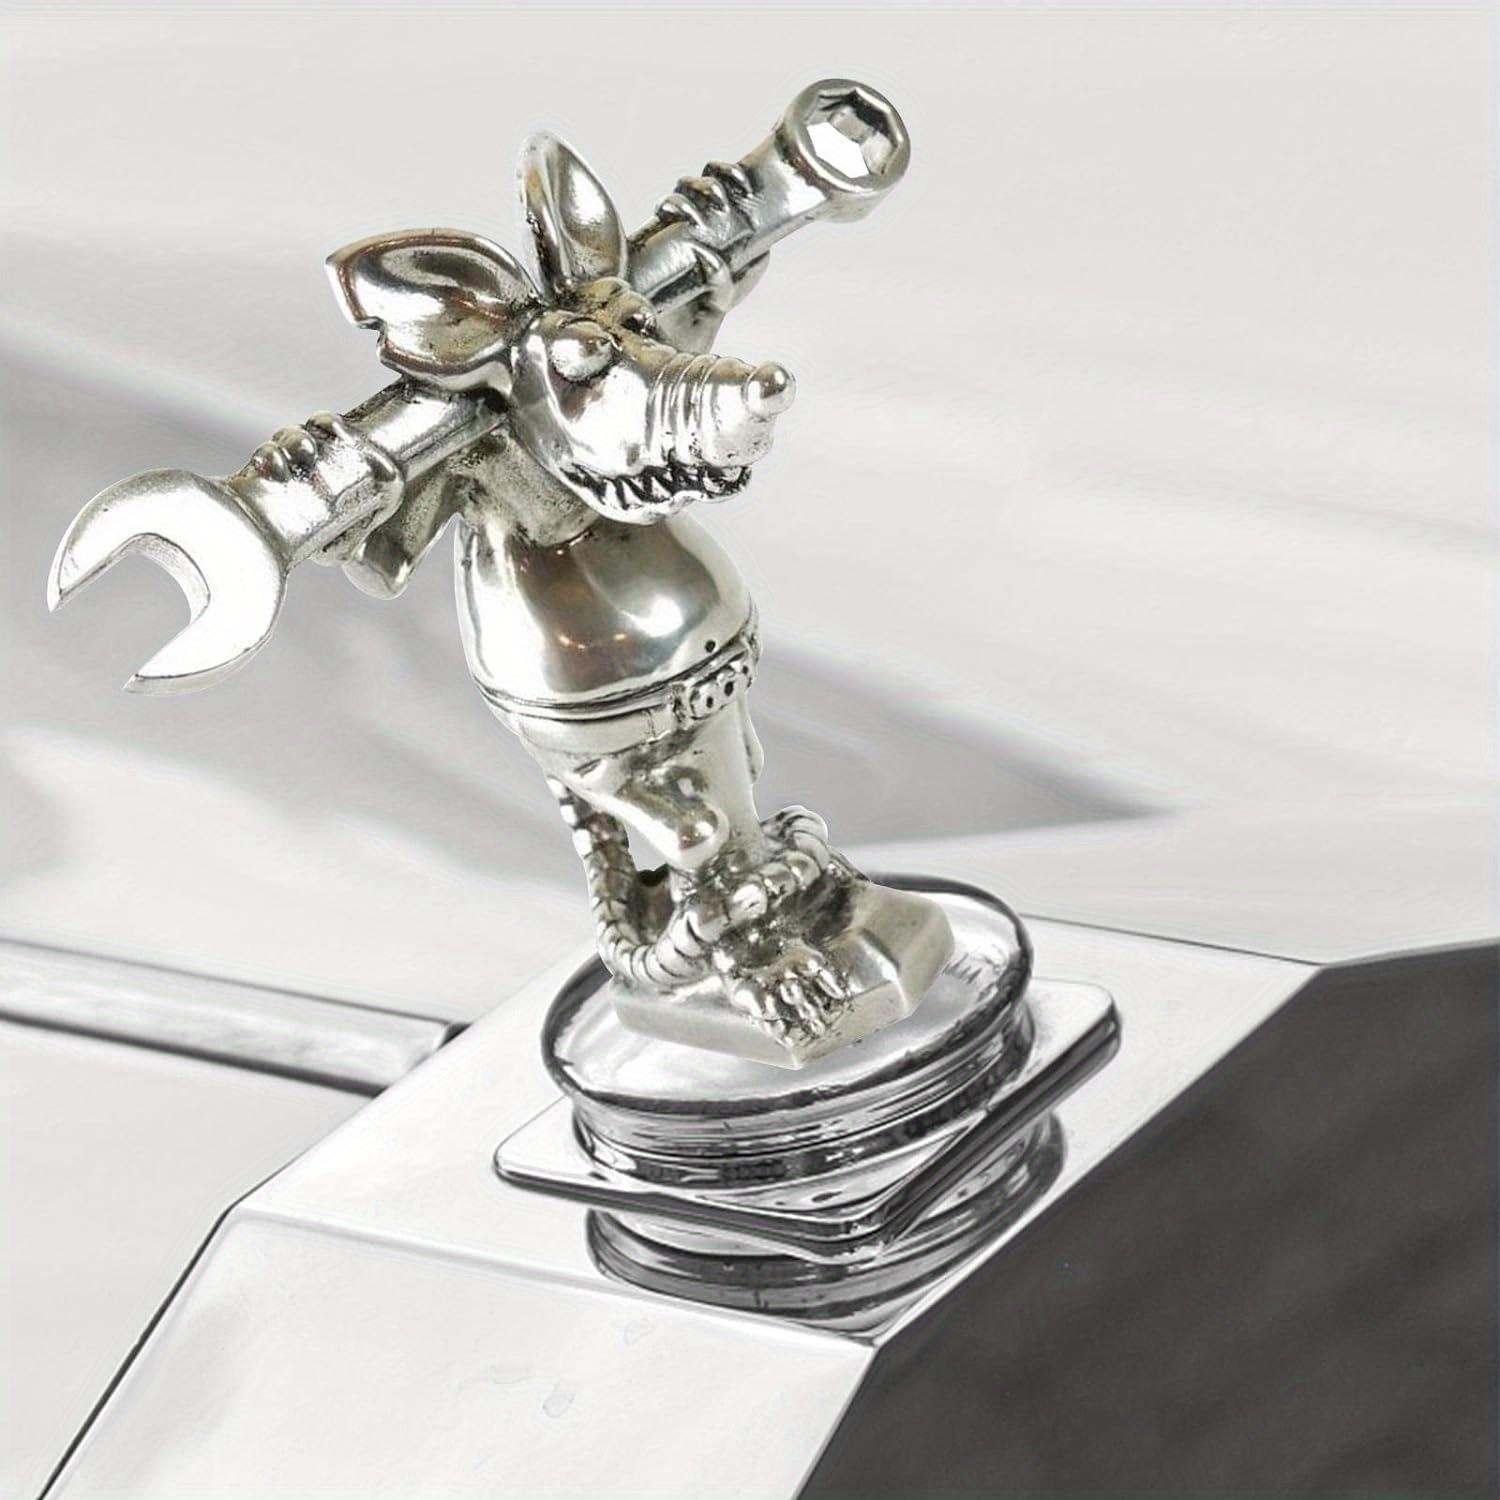 

Mechanic Rat Hood Ornament - Distinctive Vehicle Styling Accessory, Durable Material For Indoor/outdoor Display